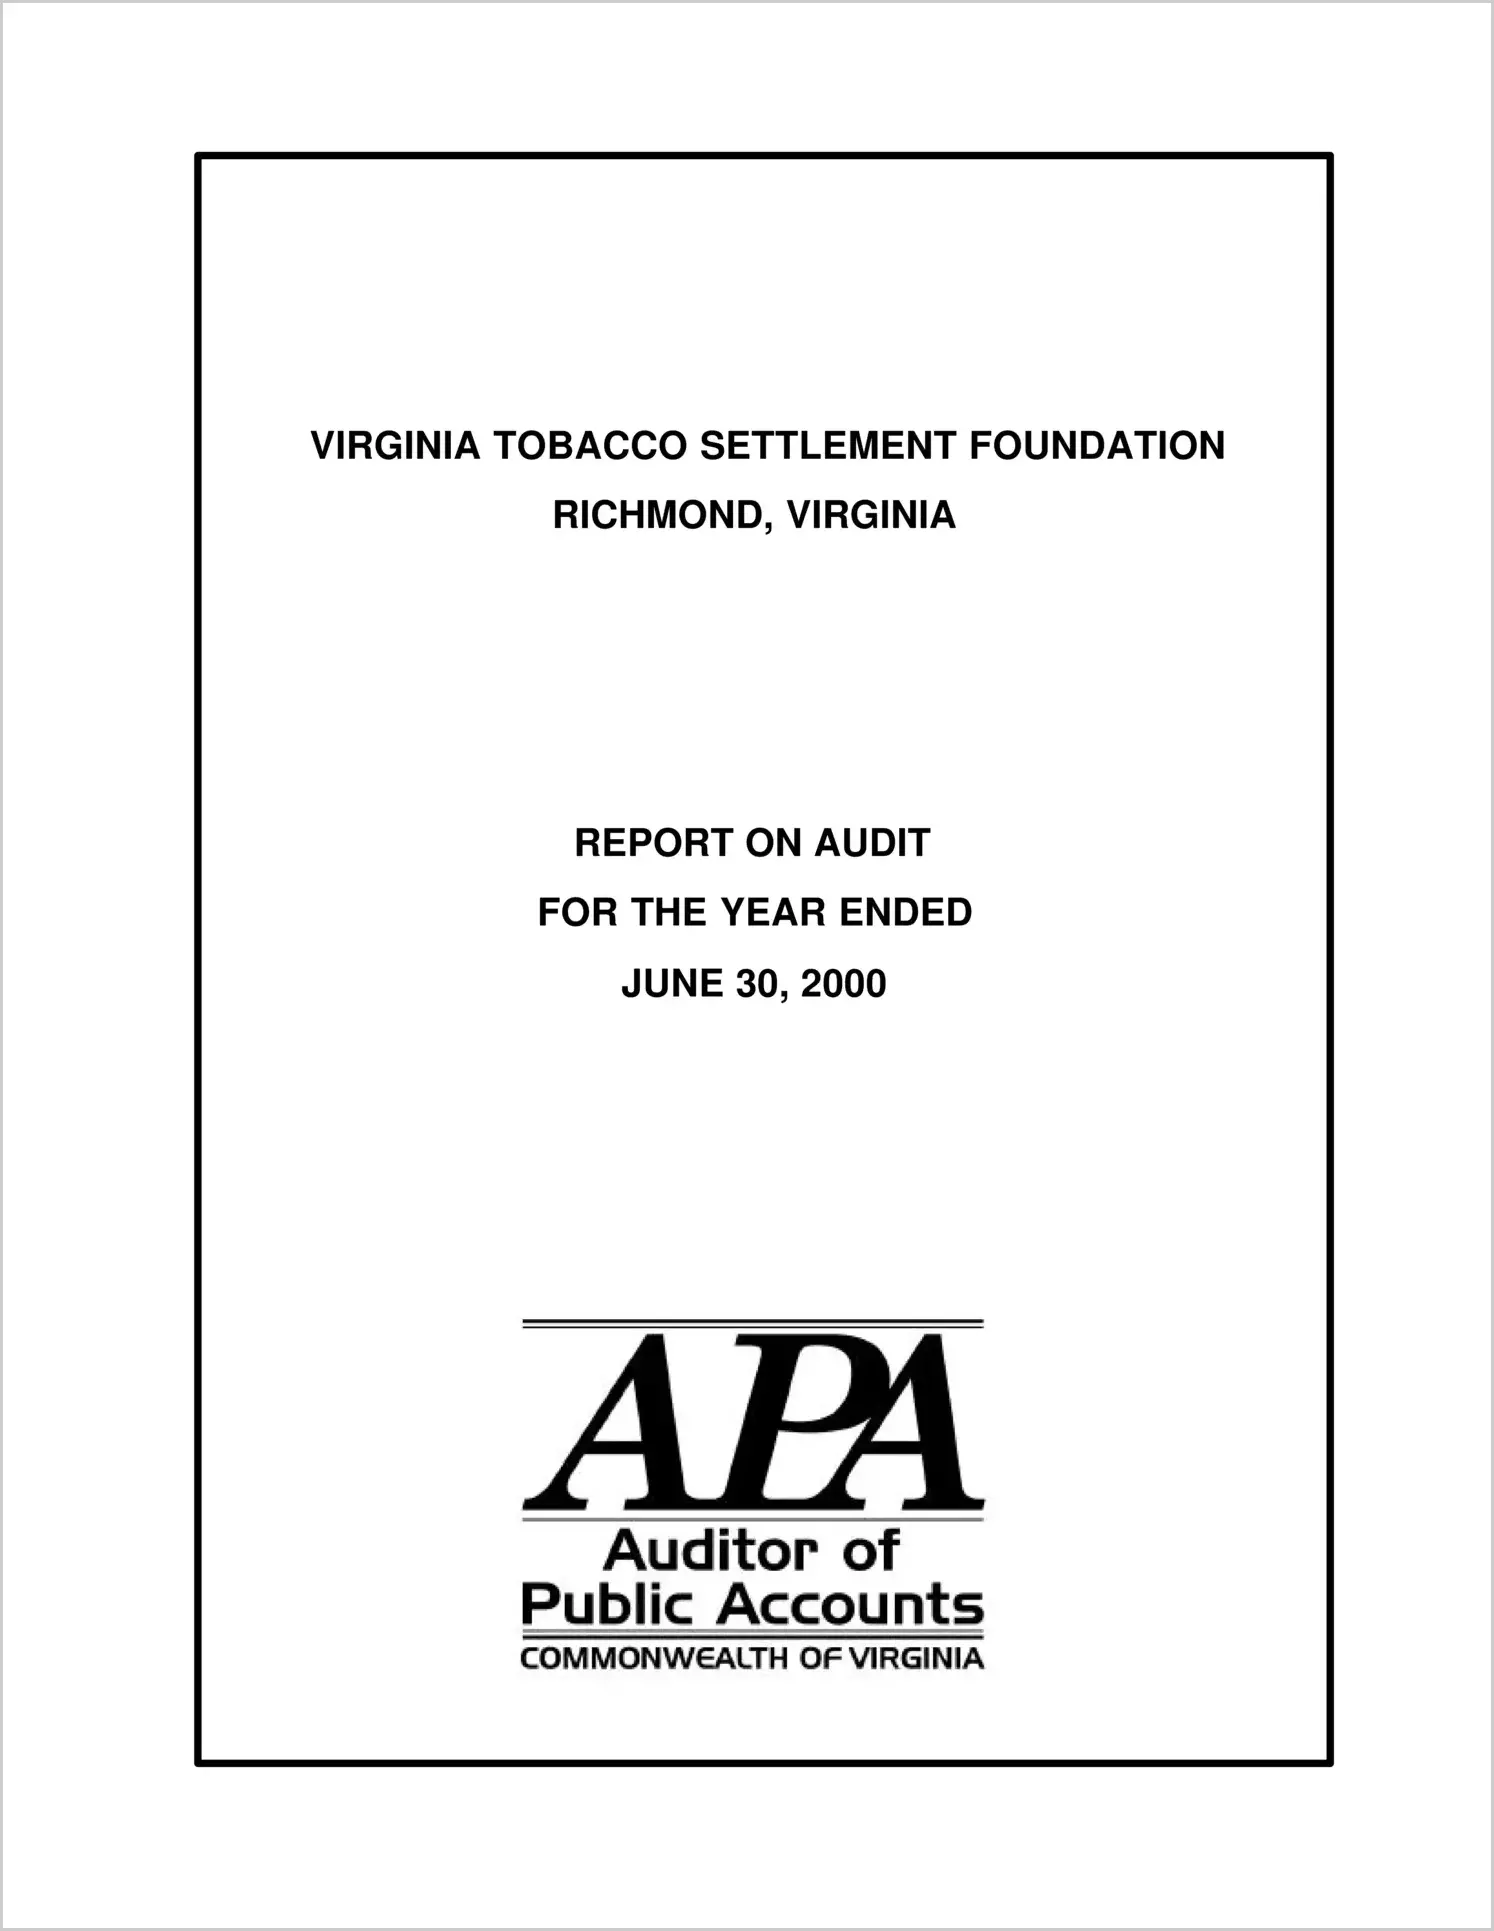 Virginia Tobacco Settlement Foundation for the year ended June 30, 2000